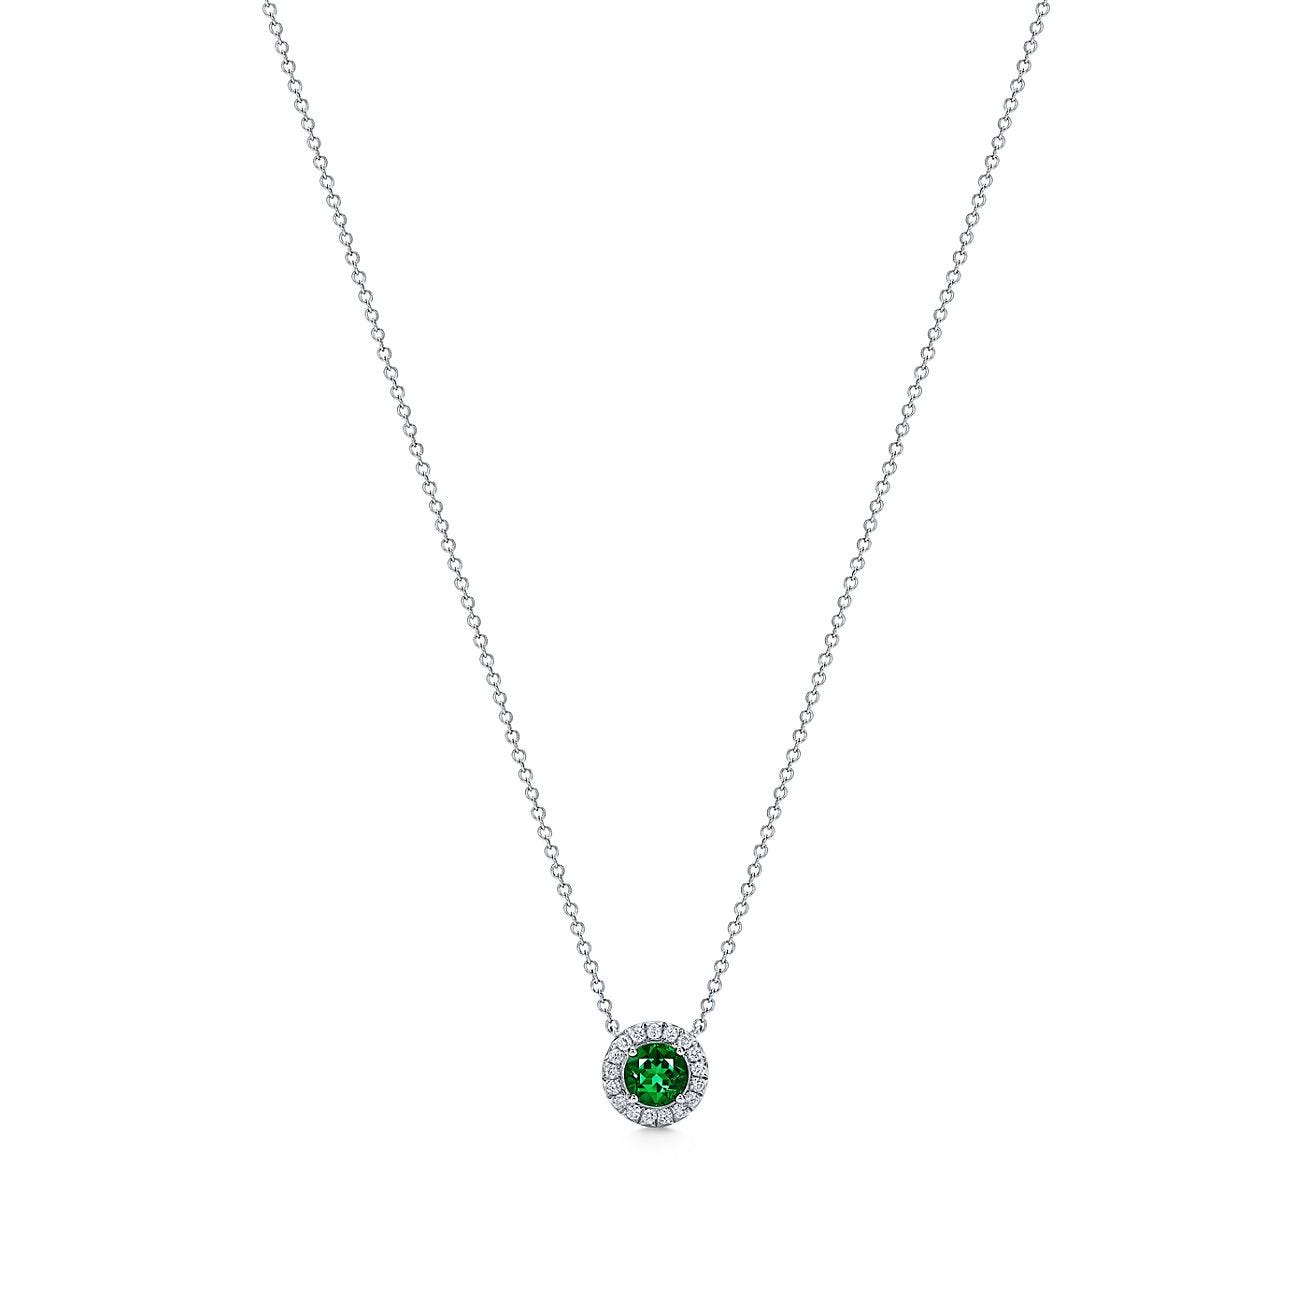 Tiffany Soleste® pendant in platinum with diamonds and an emerald.